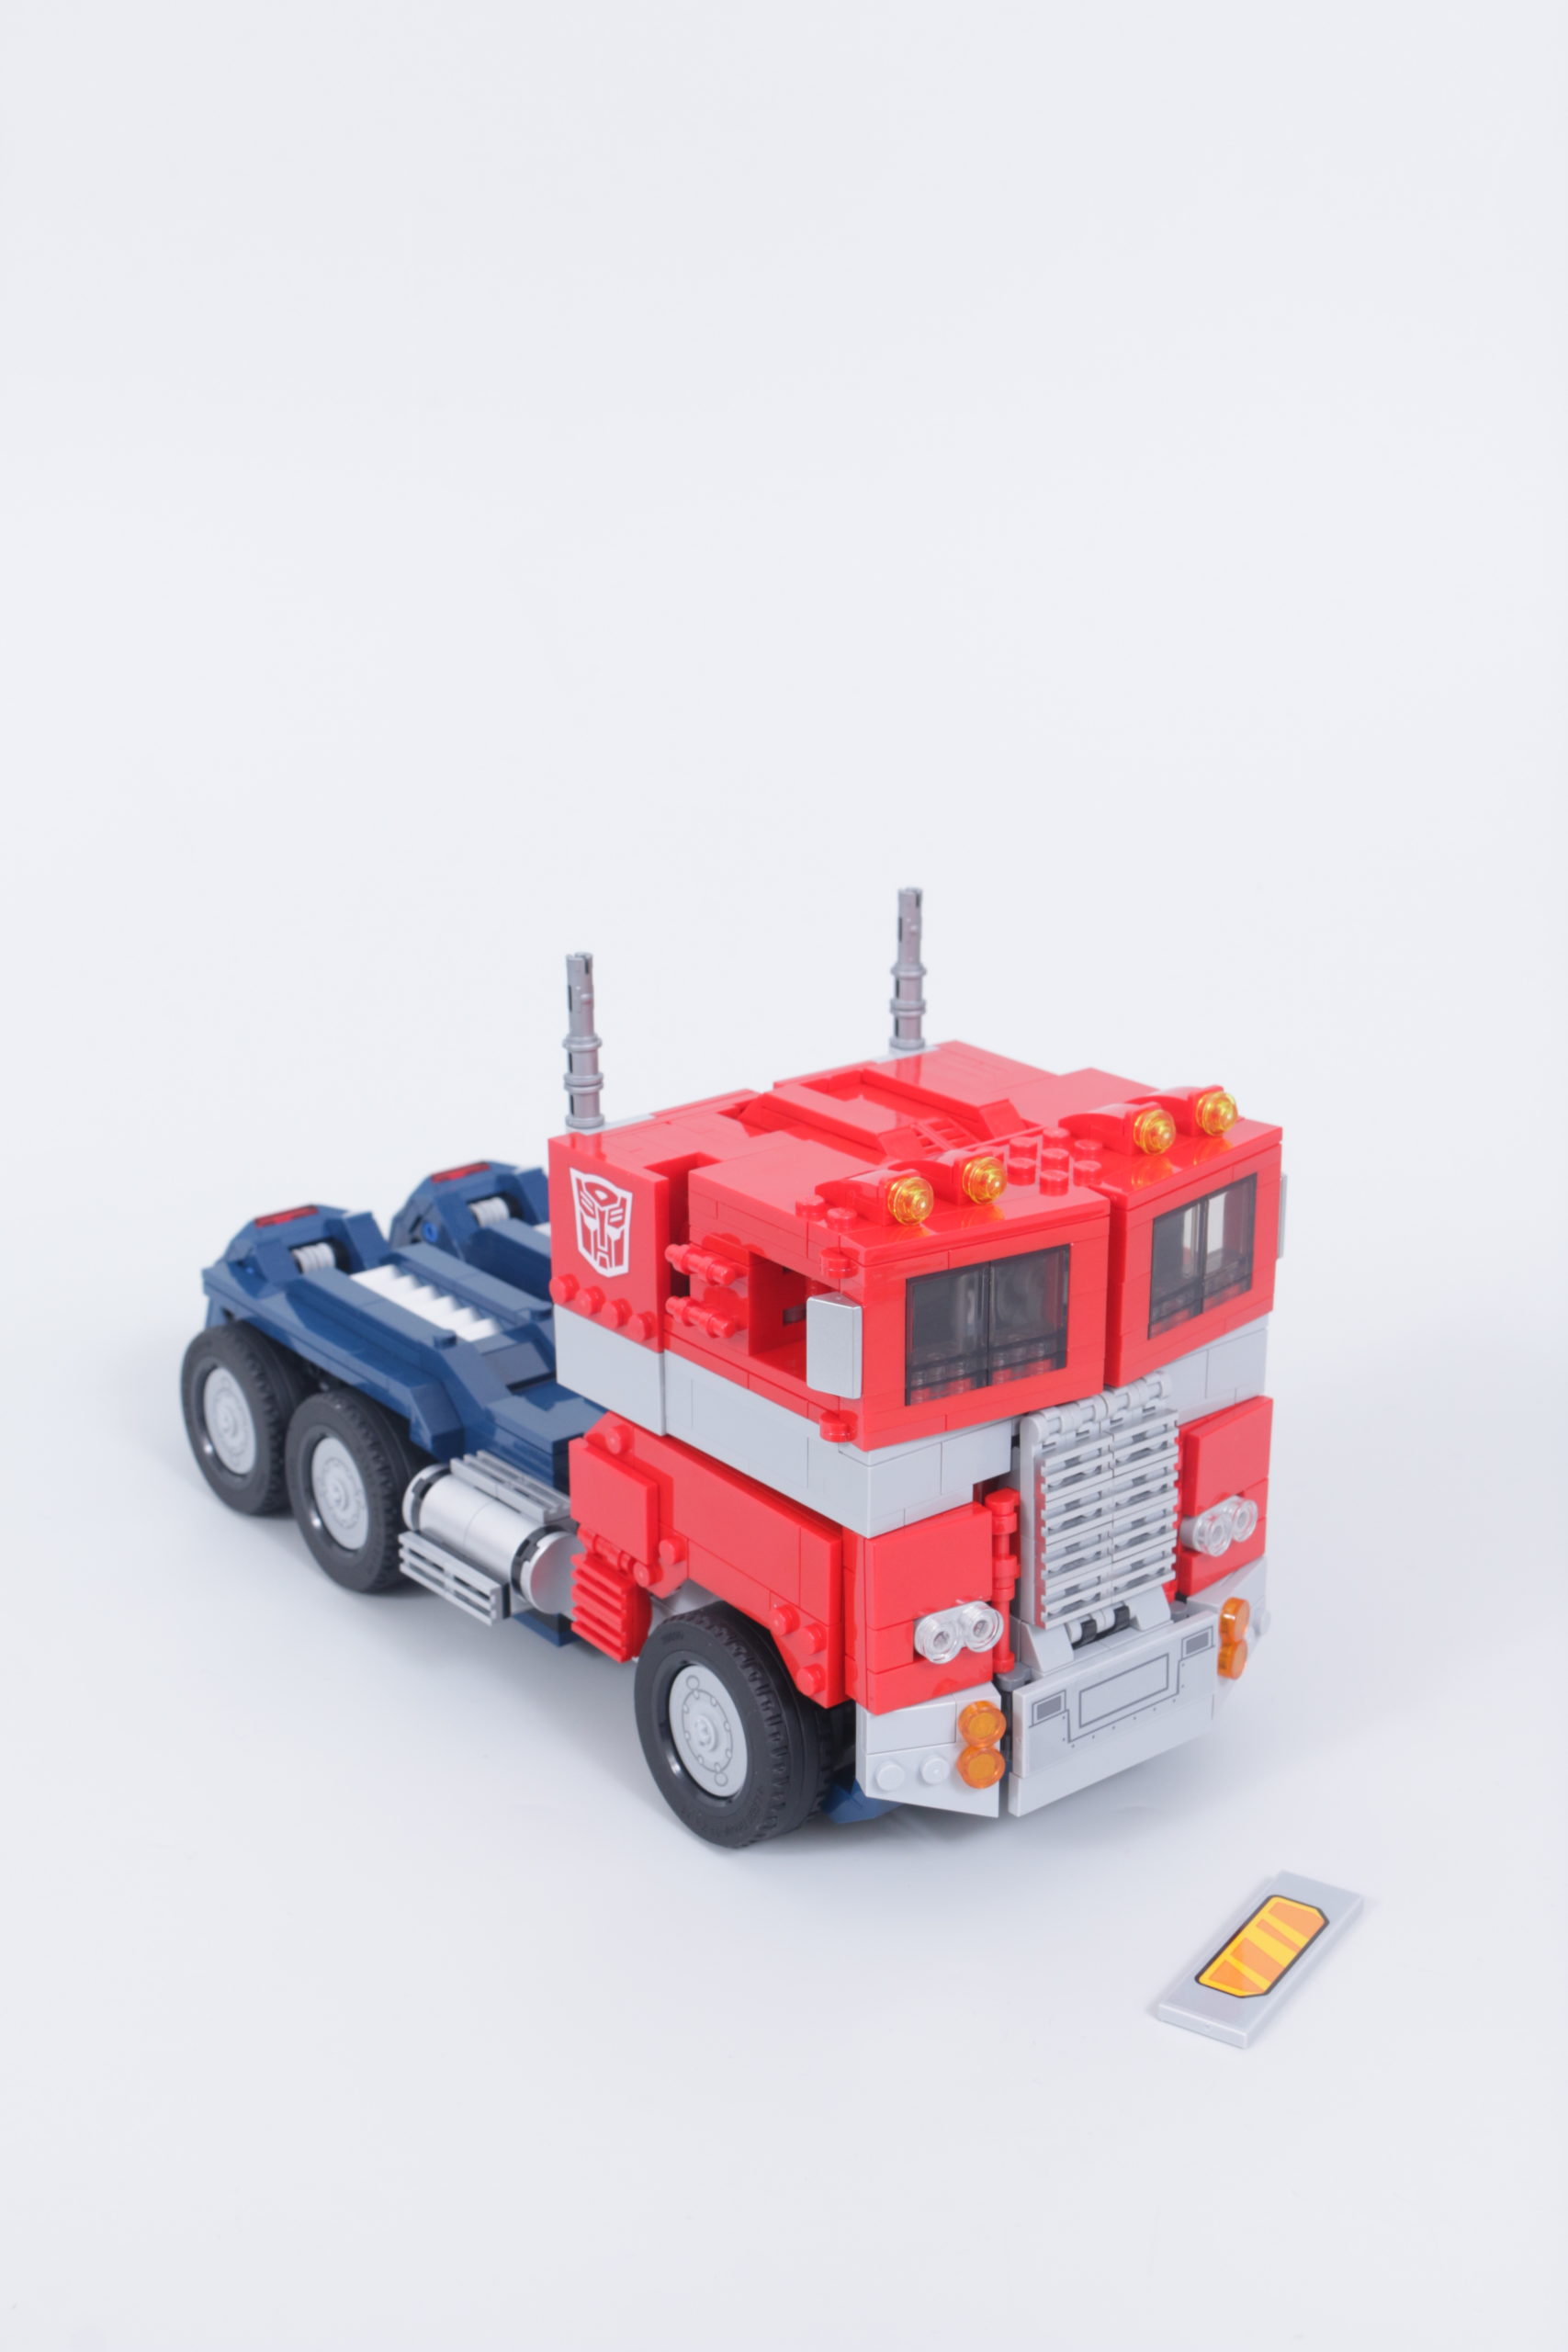 LEGO Transformers 10302 Optimus Prime review 39 scaled